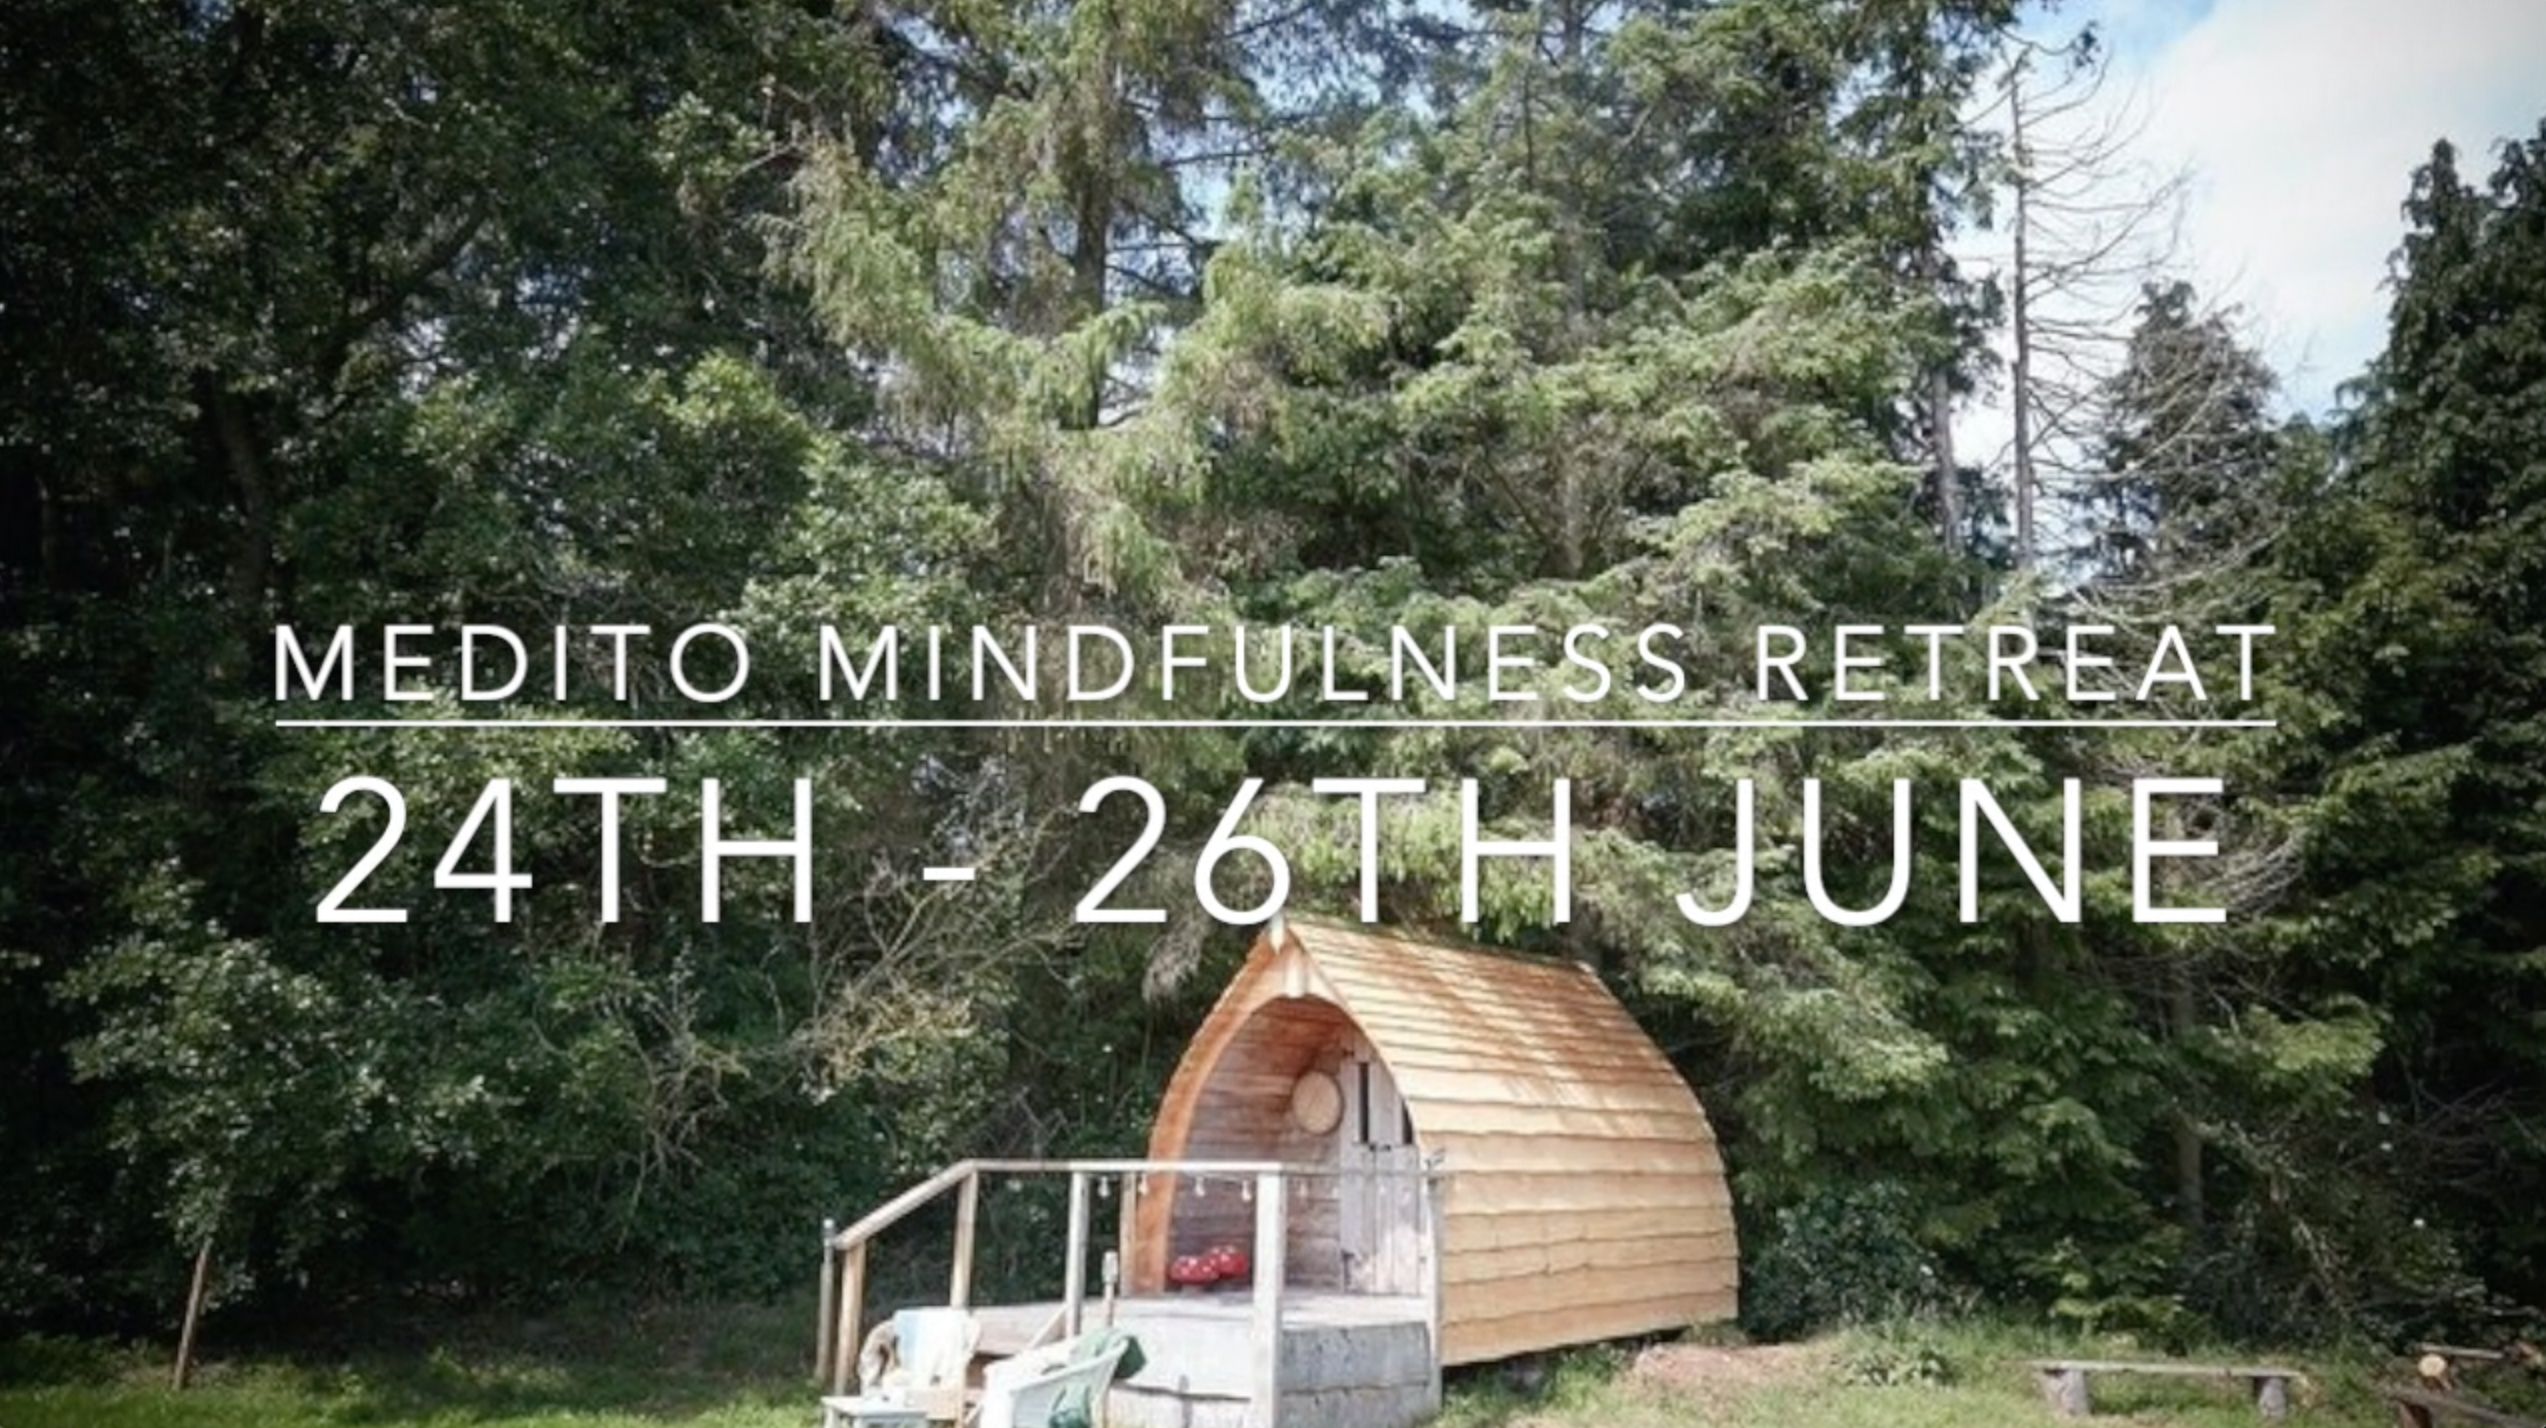 Join us at the first ever Medito Mindfulness Retreat